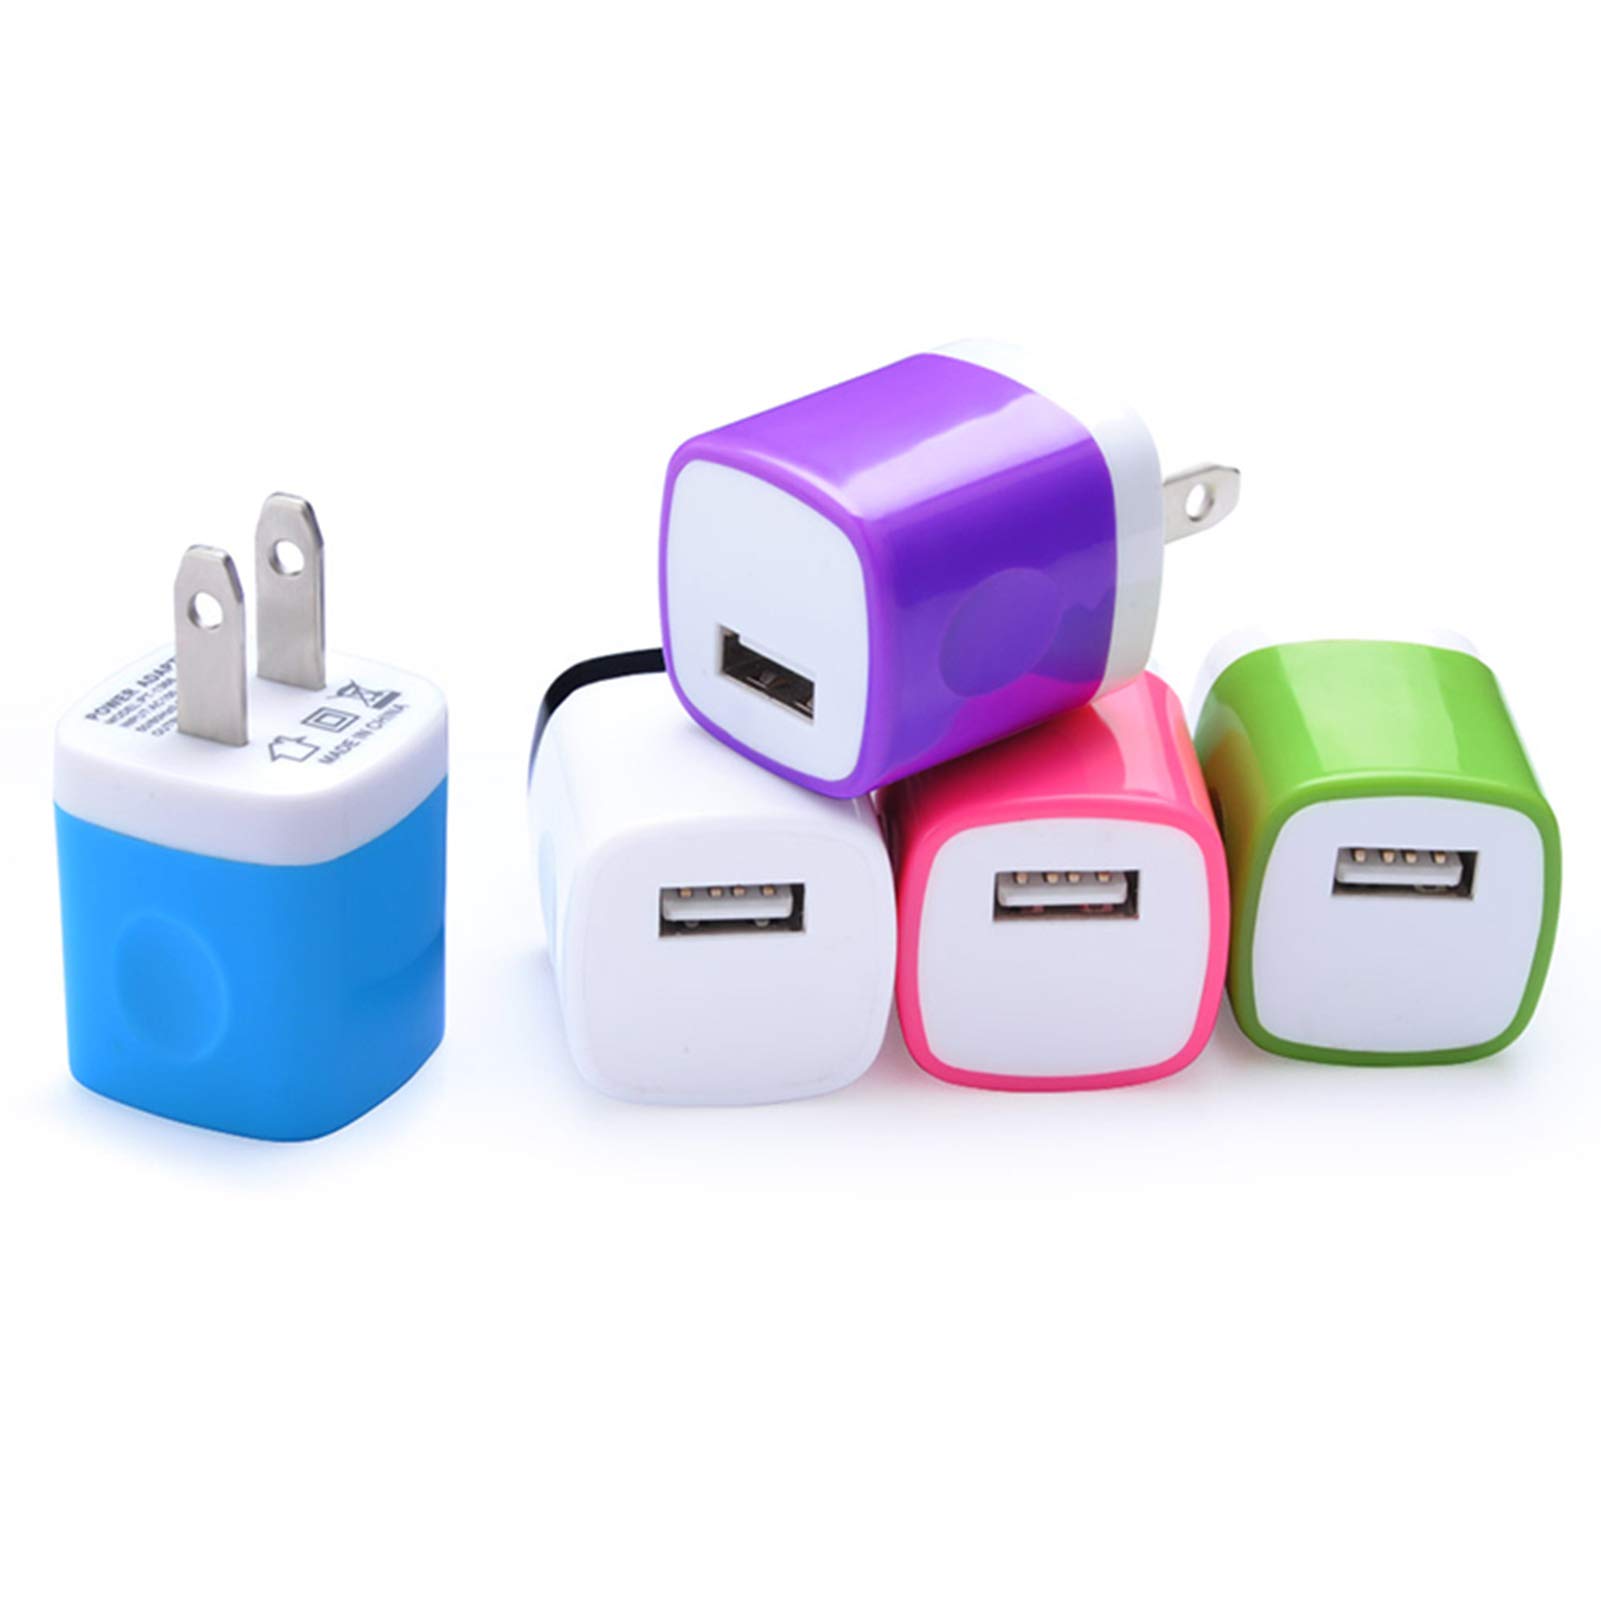 Book Cover Wall Charger 5Pack, Home Travel USB Power Adapter Wall Charger Plug Charging Block Cube for iPhone 14 13 12 11 Pro Max/10/SE/Xs/XR/X/8/7/6/6S Plus,Samsung Galaxy S21 S20 S10 A12 A32,LG,Kindle,Android White, Purple, Blue, Rose, Green